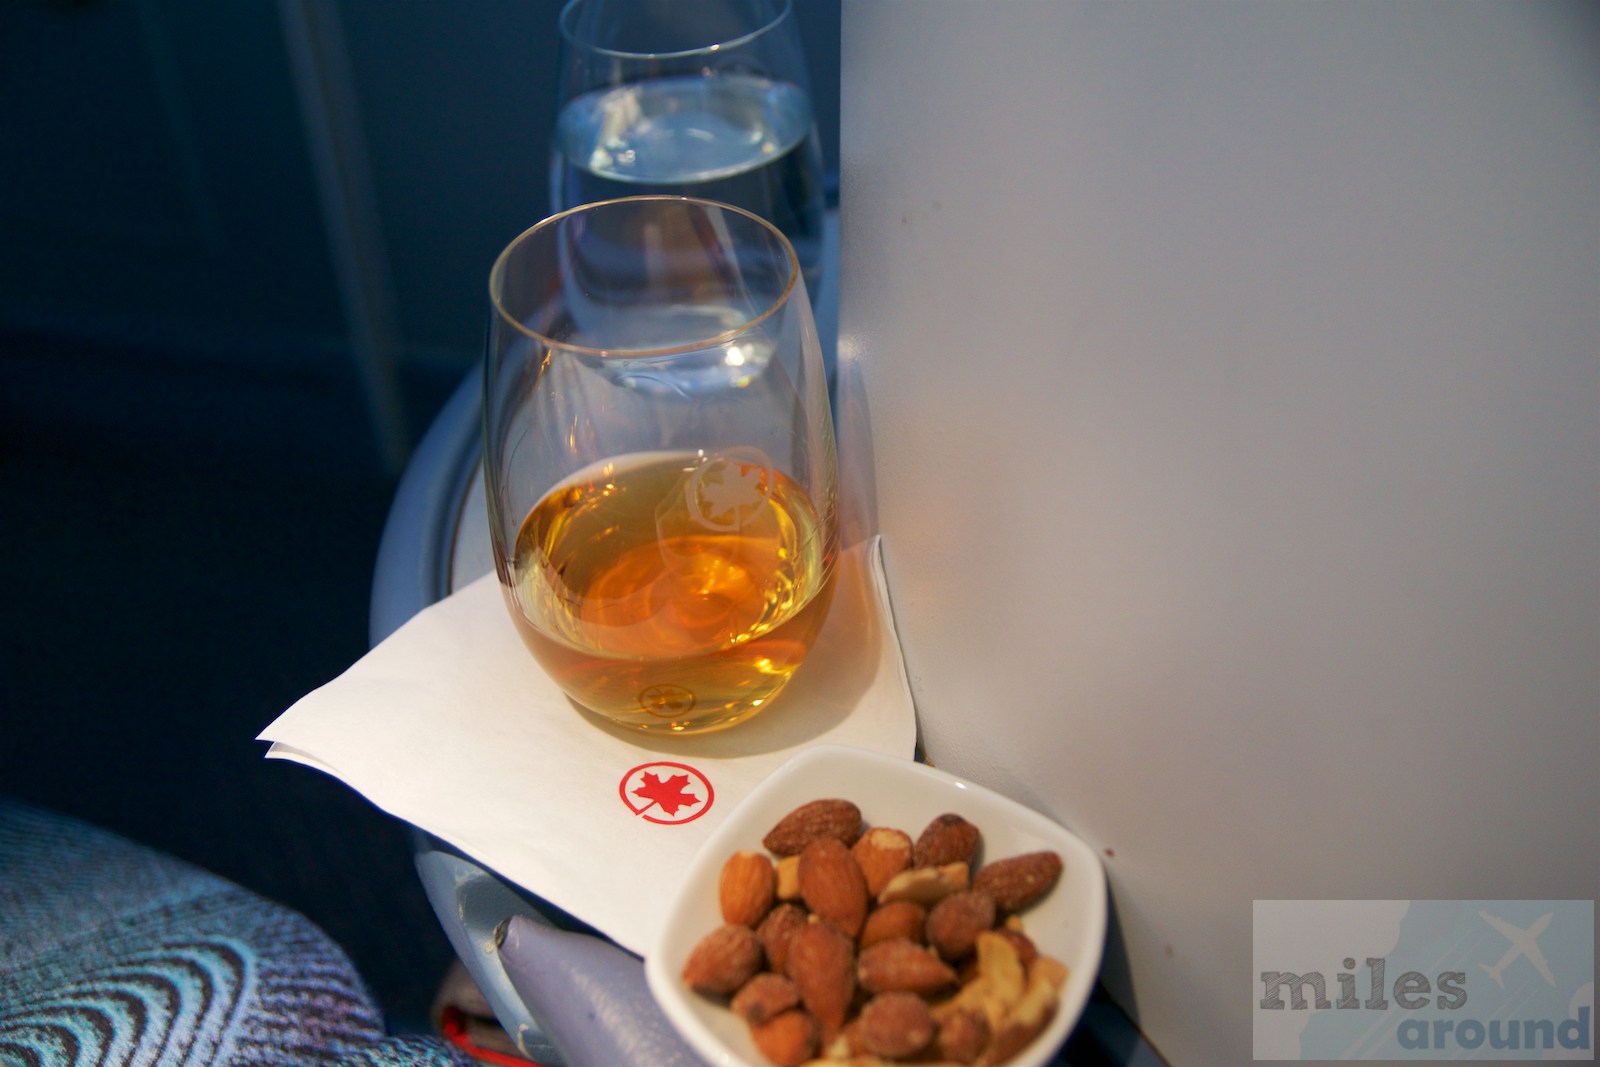 Air Canada Airbus A330 300 Business class cabin Welcome drink Johnnie Walker Black Label with a nut mixture @milesaround